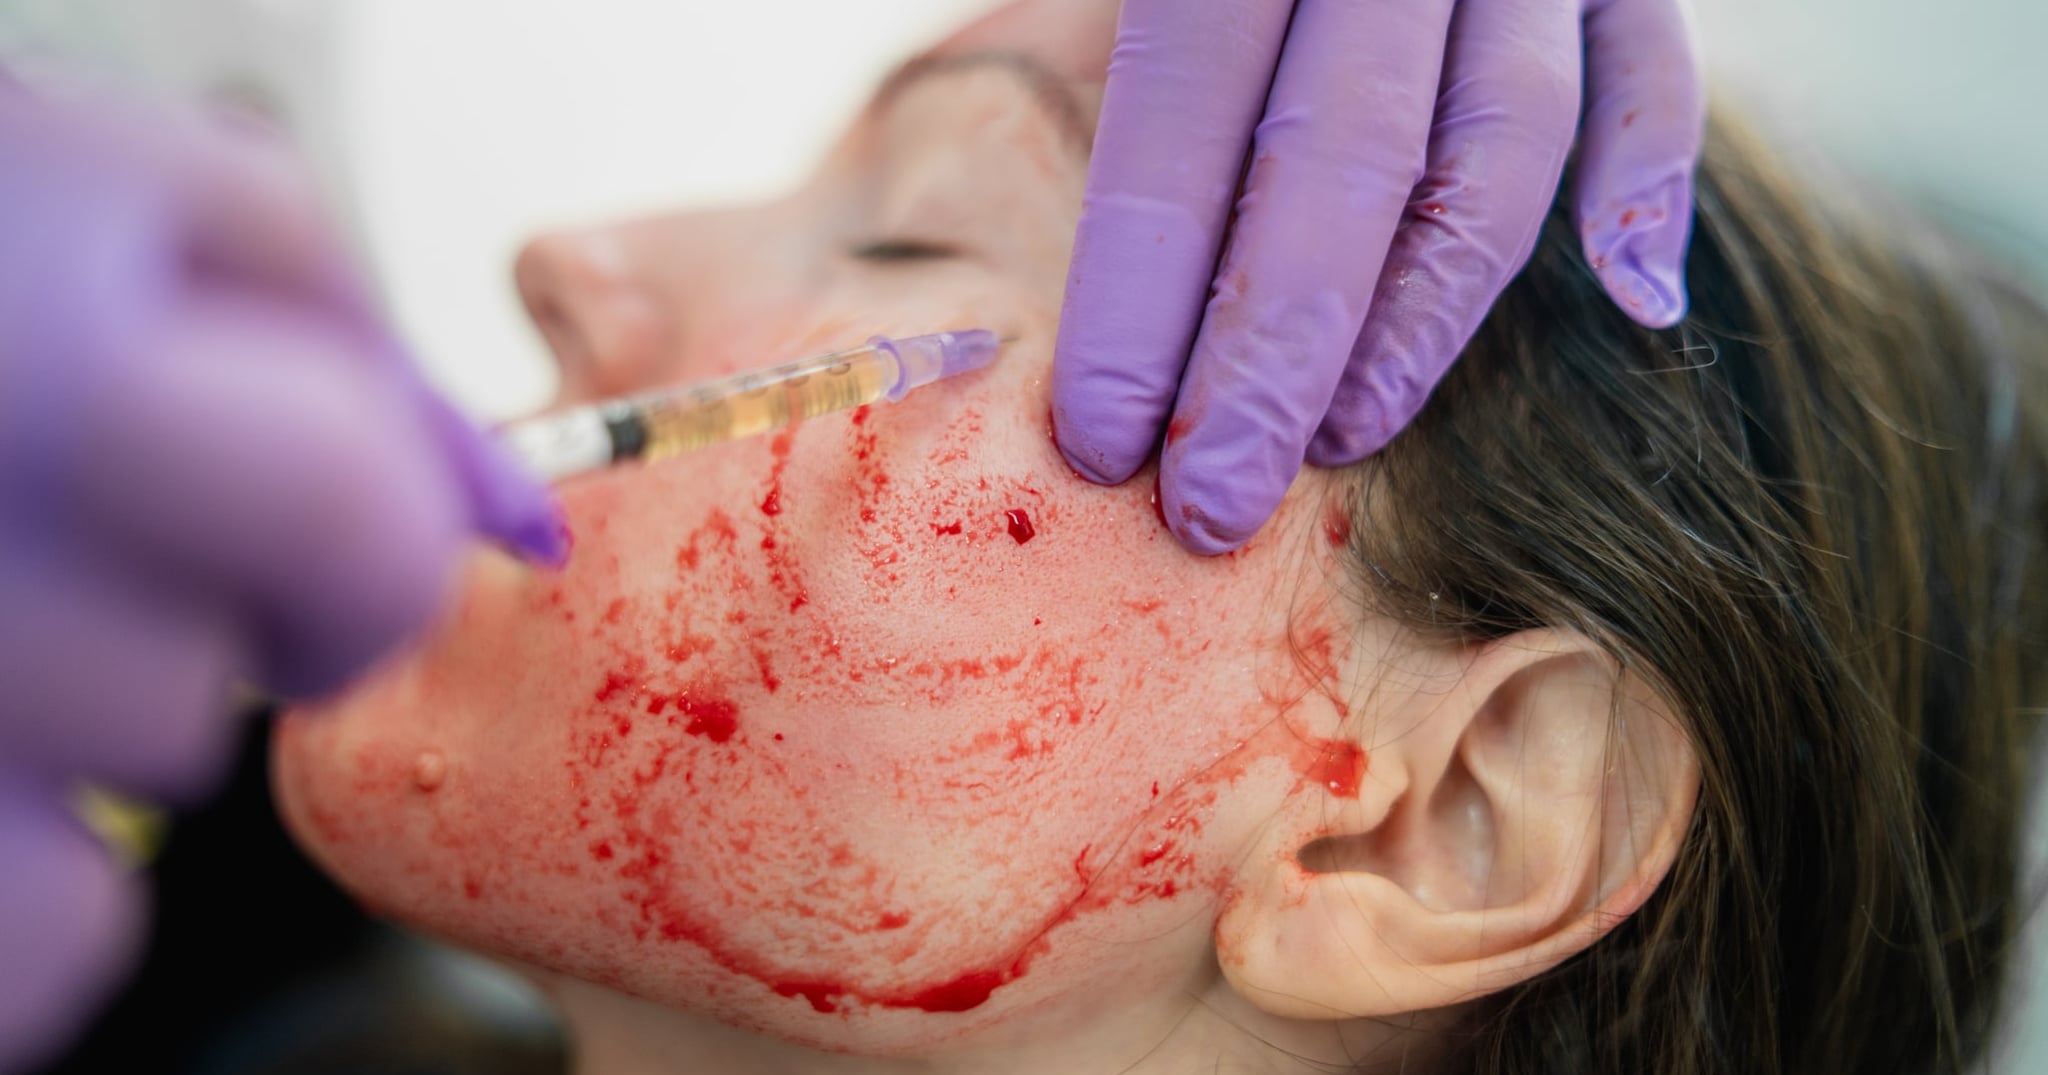 Multiple People Have Been Diagnosed With HIV After Getting a “Vampire Facial”